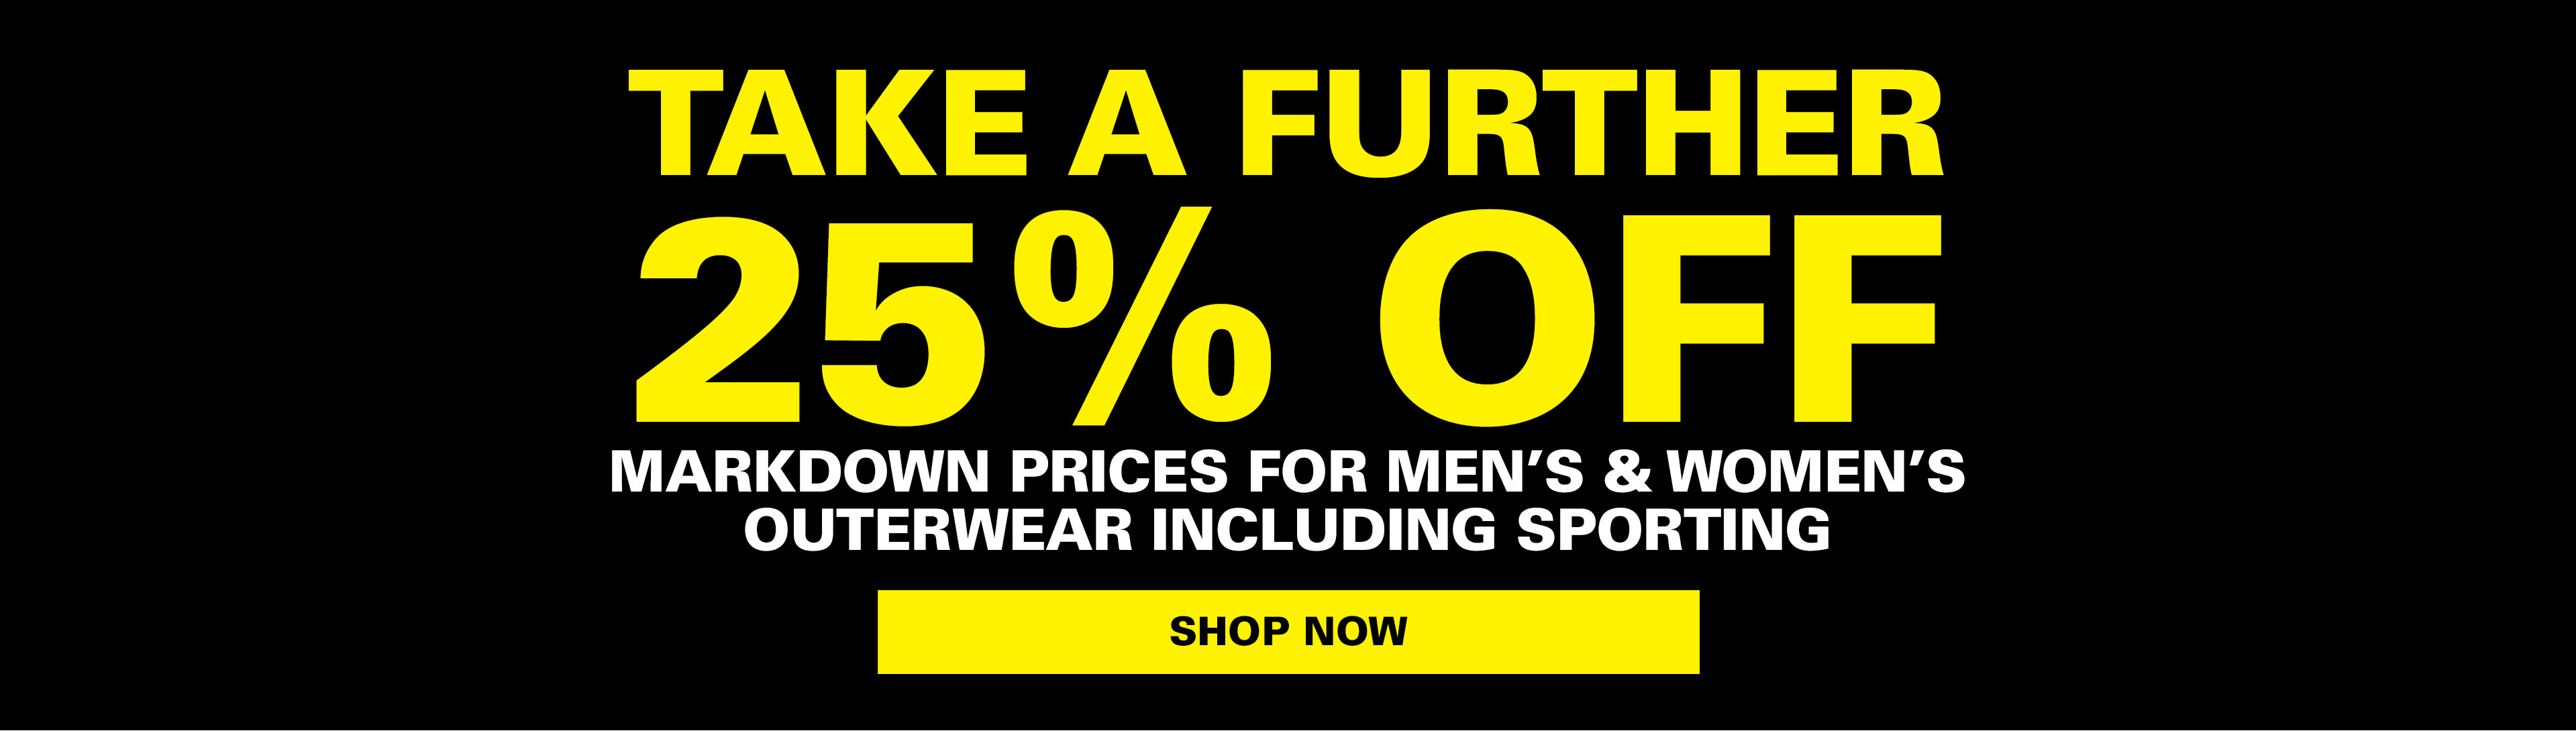 Take a further 25% OFF on outerwear